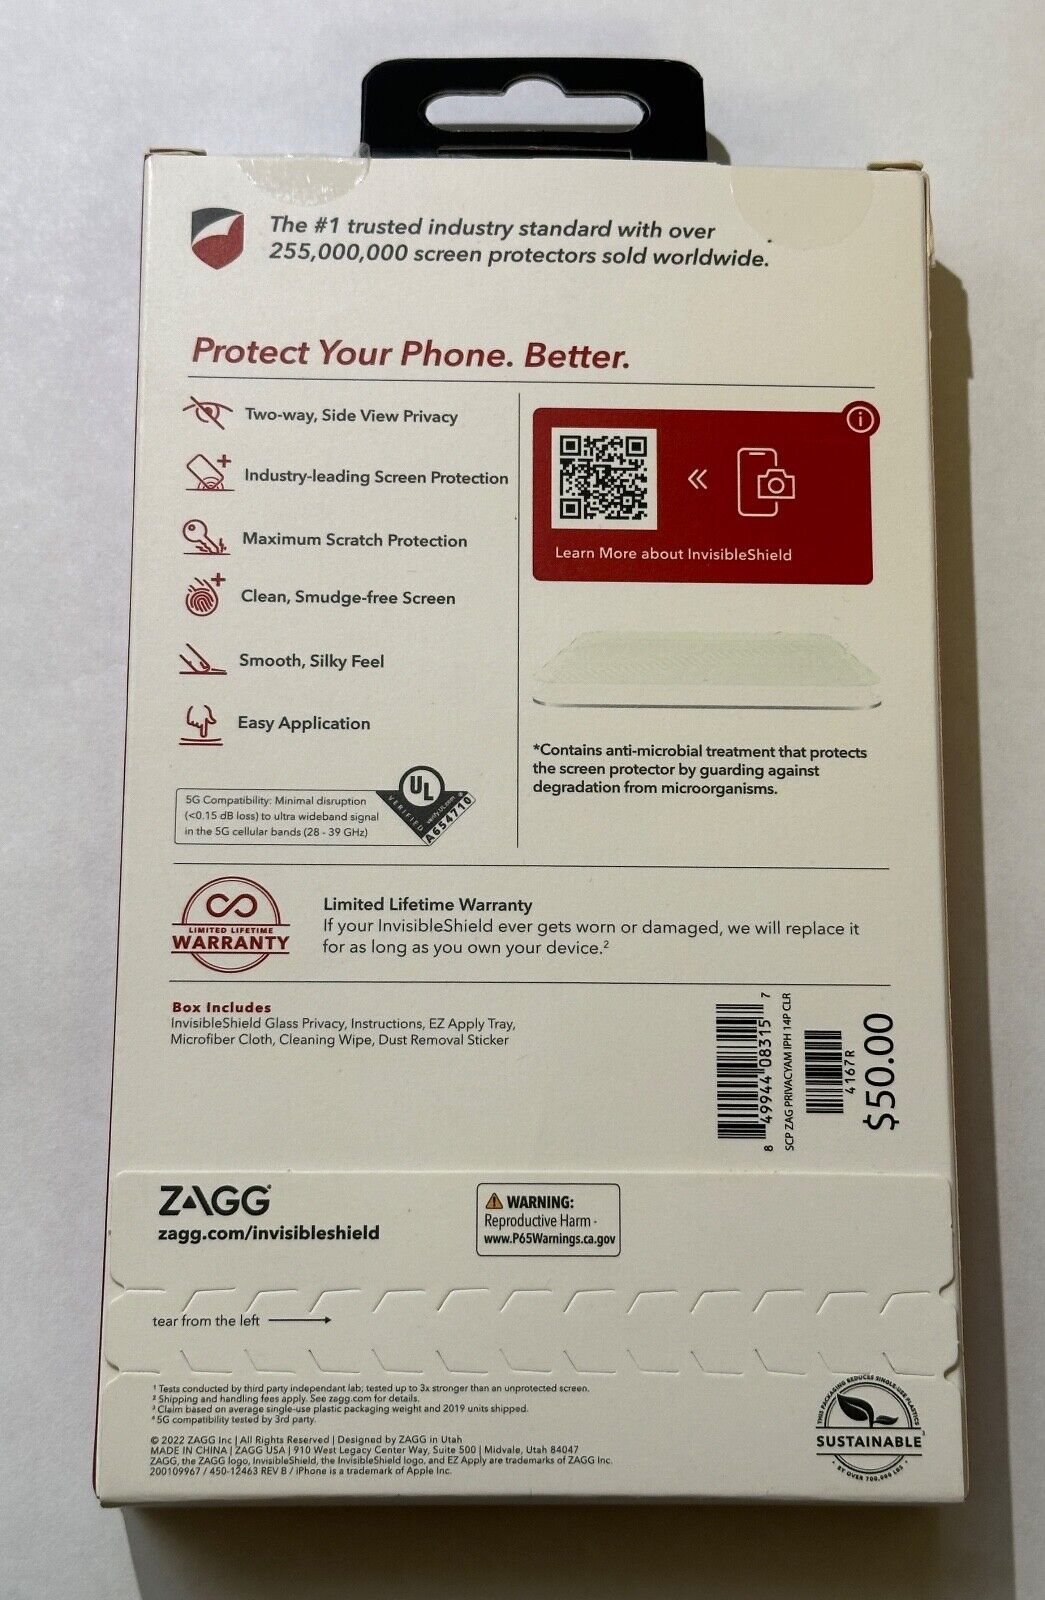 ZAGG Glass Privacy Tinted Screen Protector for Apple iPhone 14 Pro (6.1")